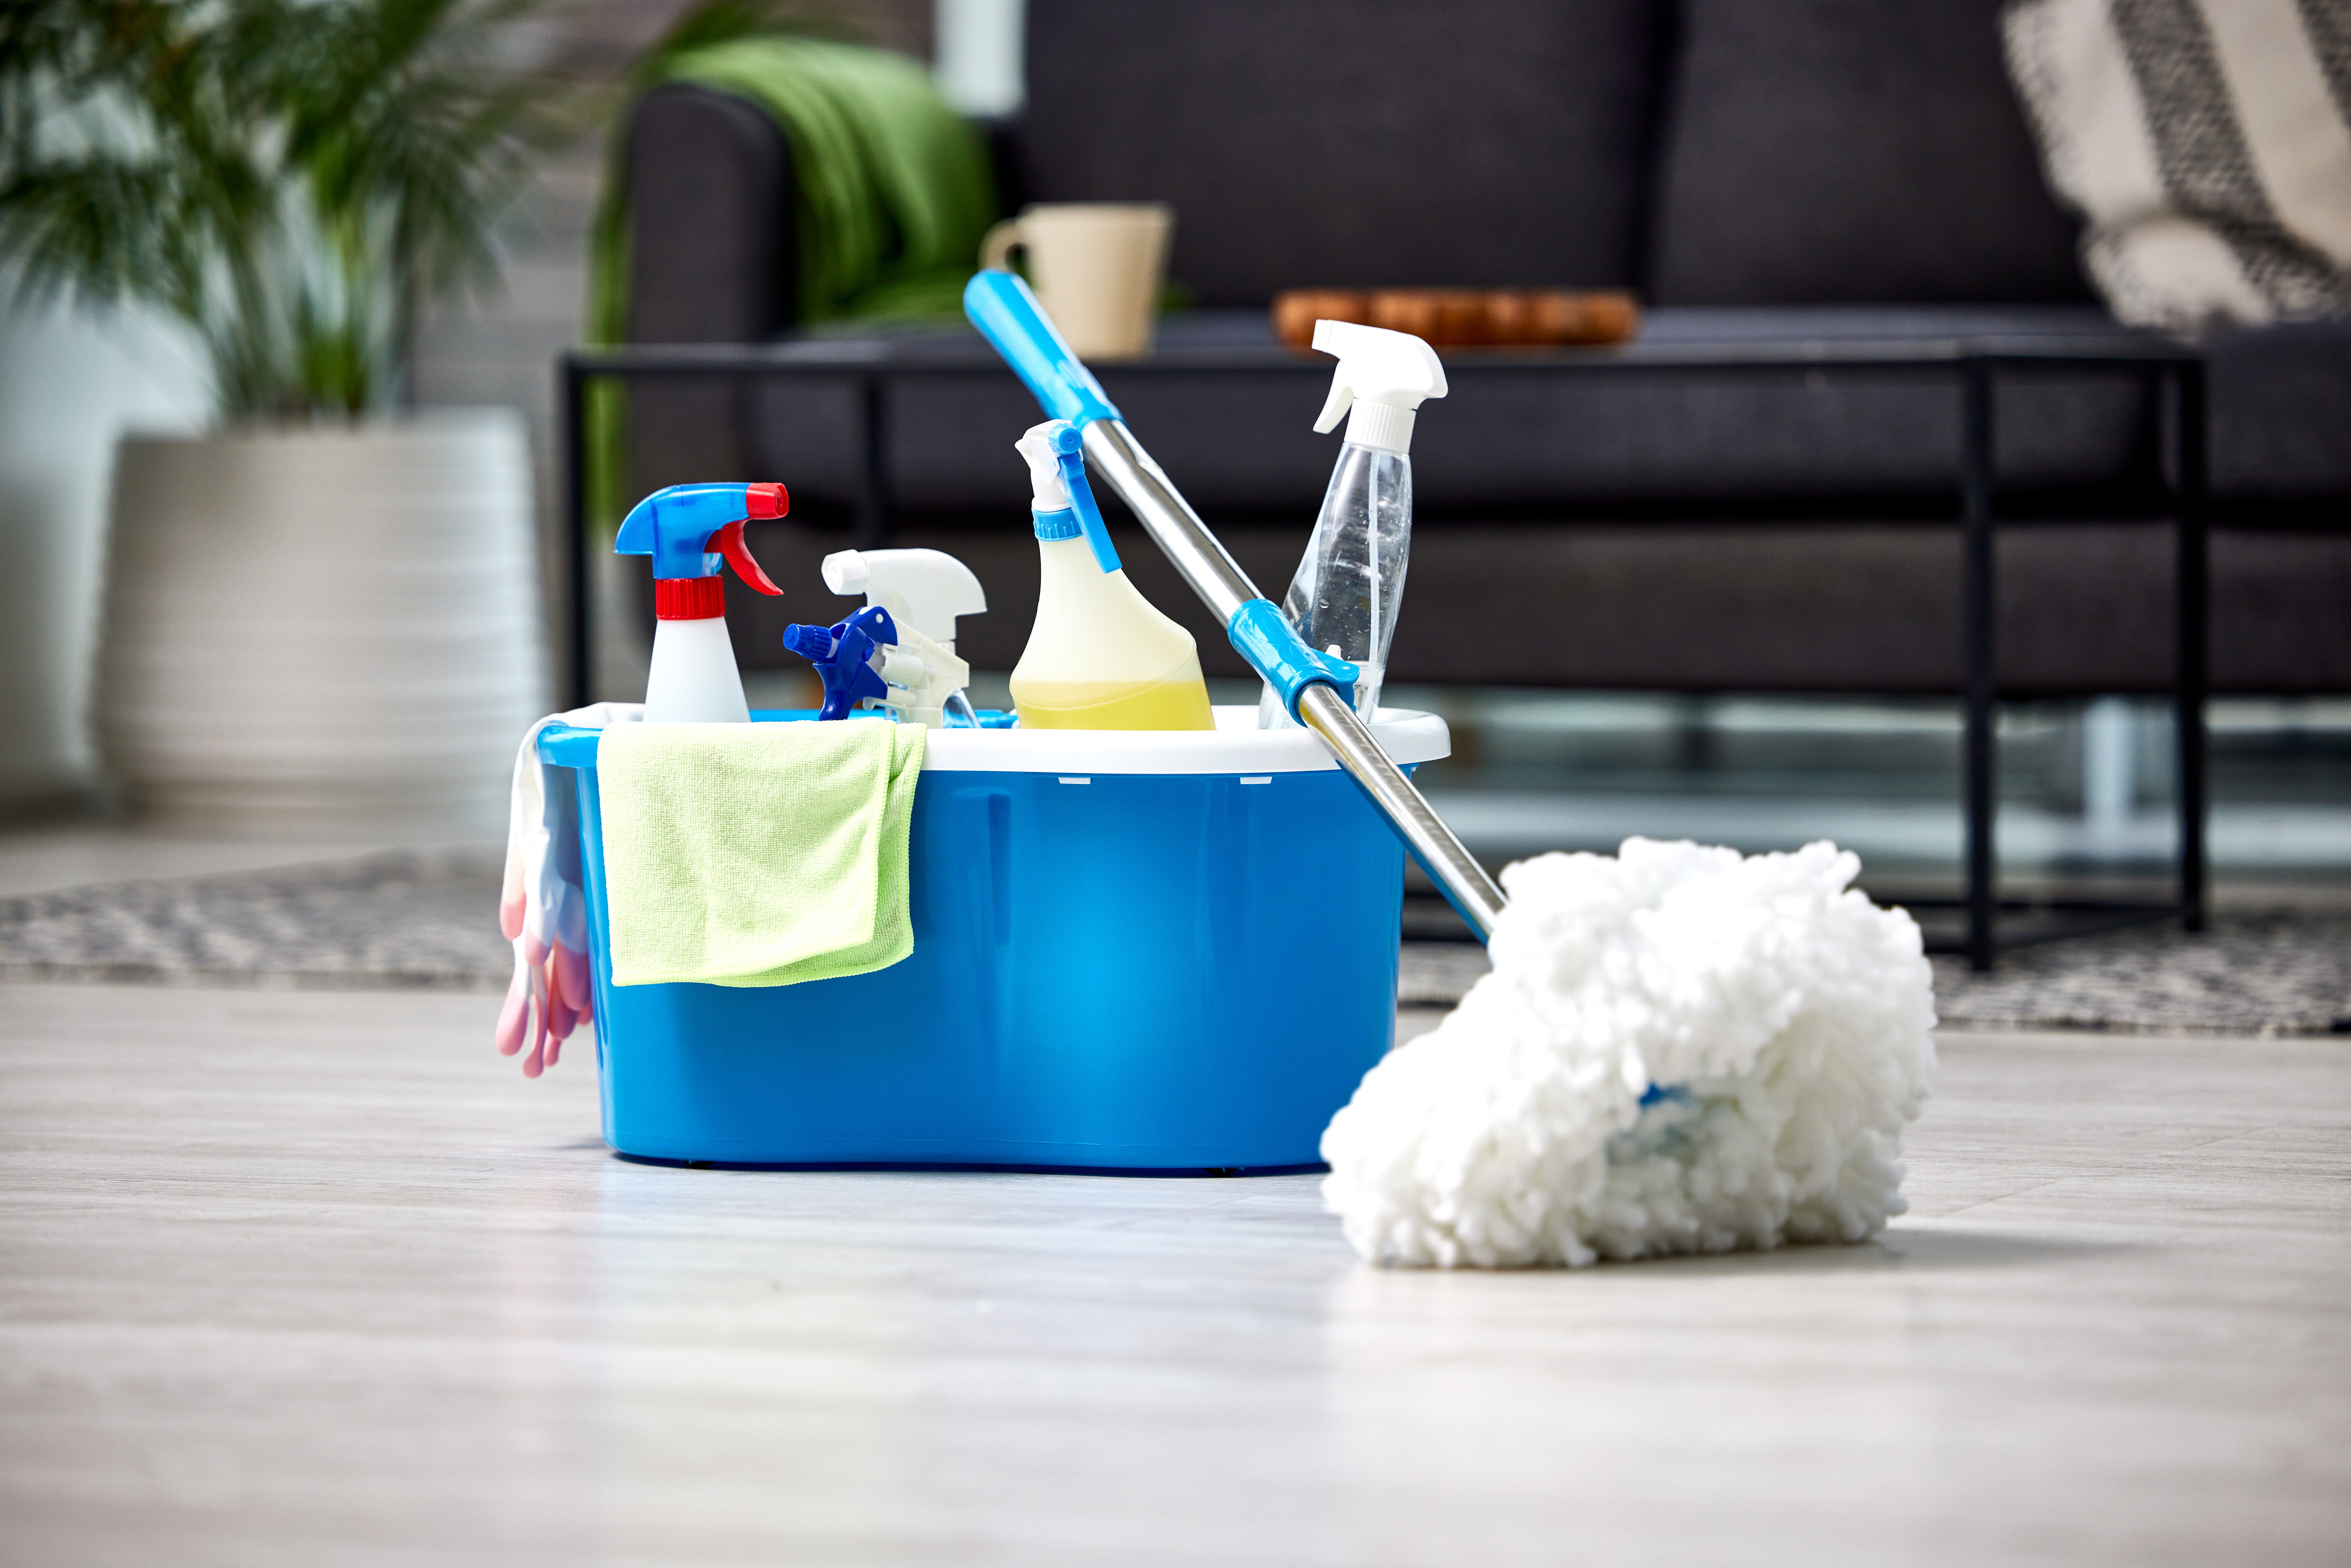 Cleaning Company Web Design